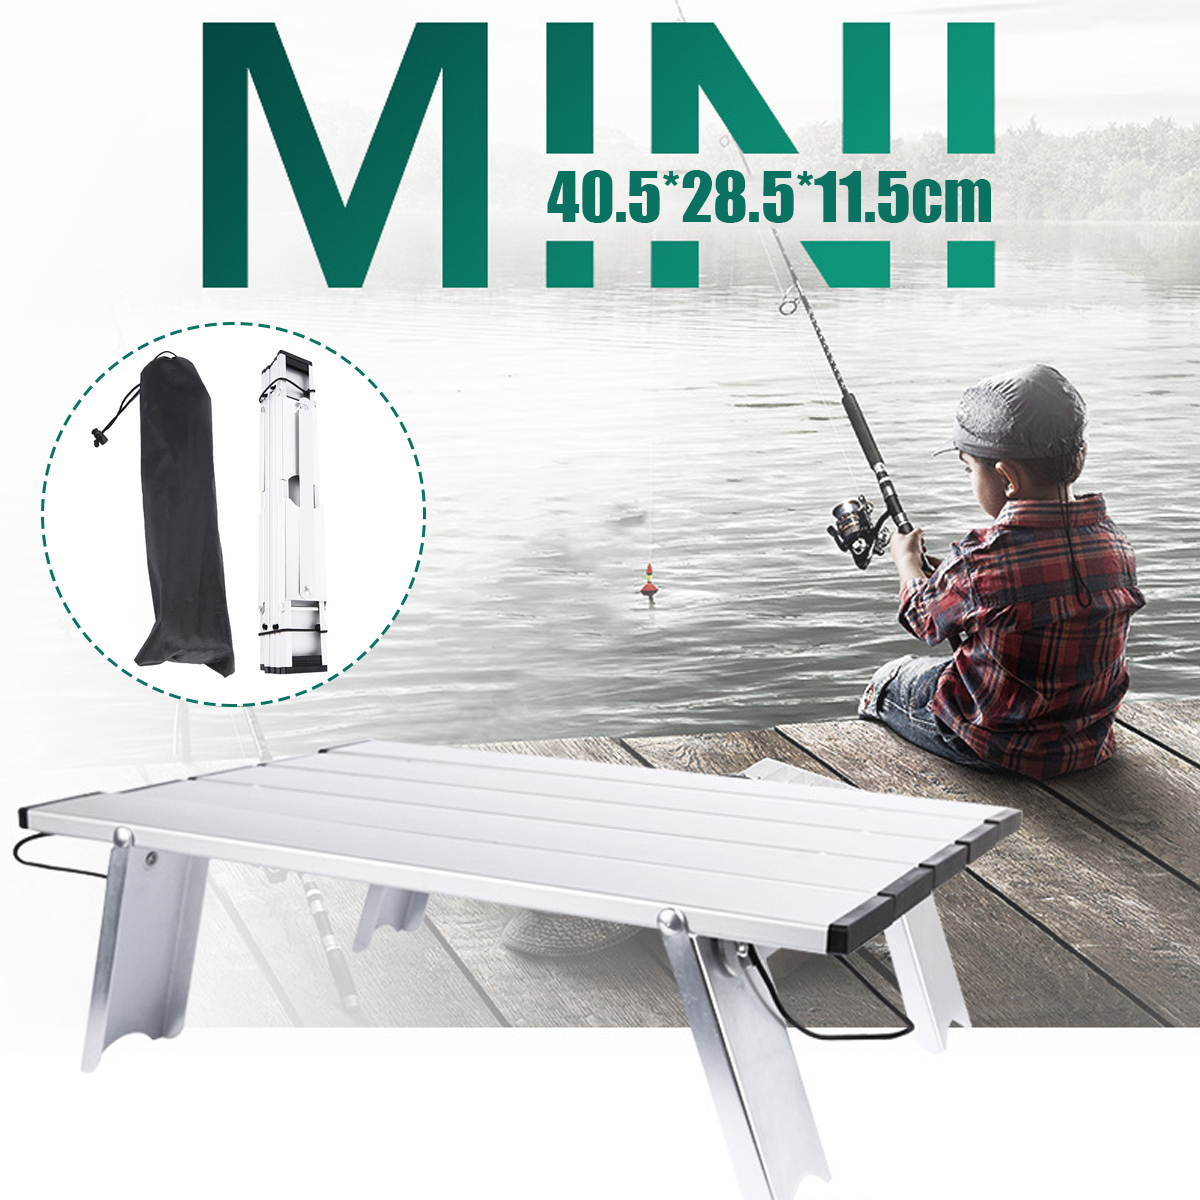 Mini-Portable-Metal-Camping-Table-Lightweight-Foldable-Compact-Hiking-Outdoor-1721344-1